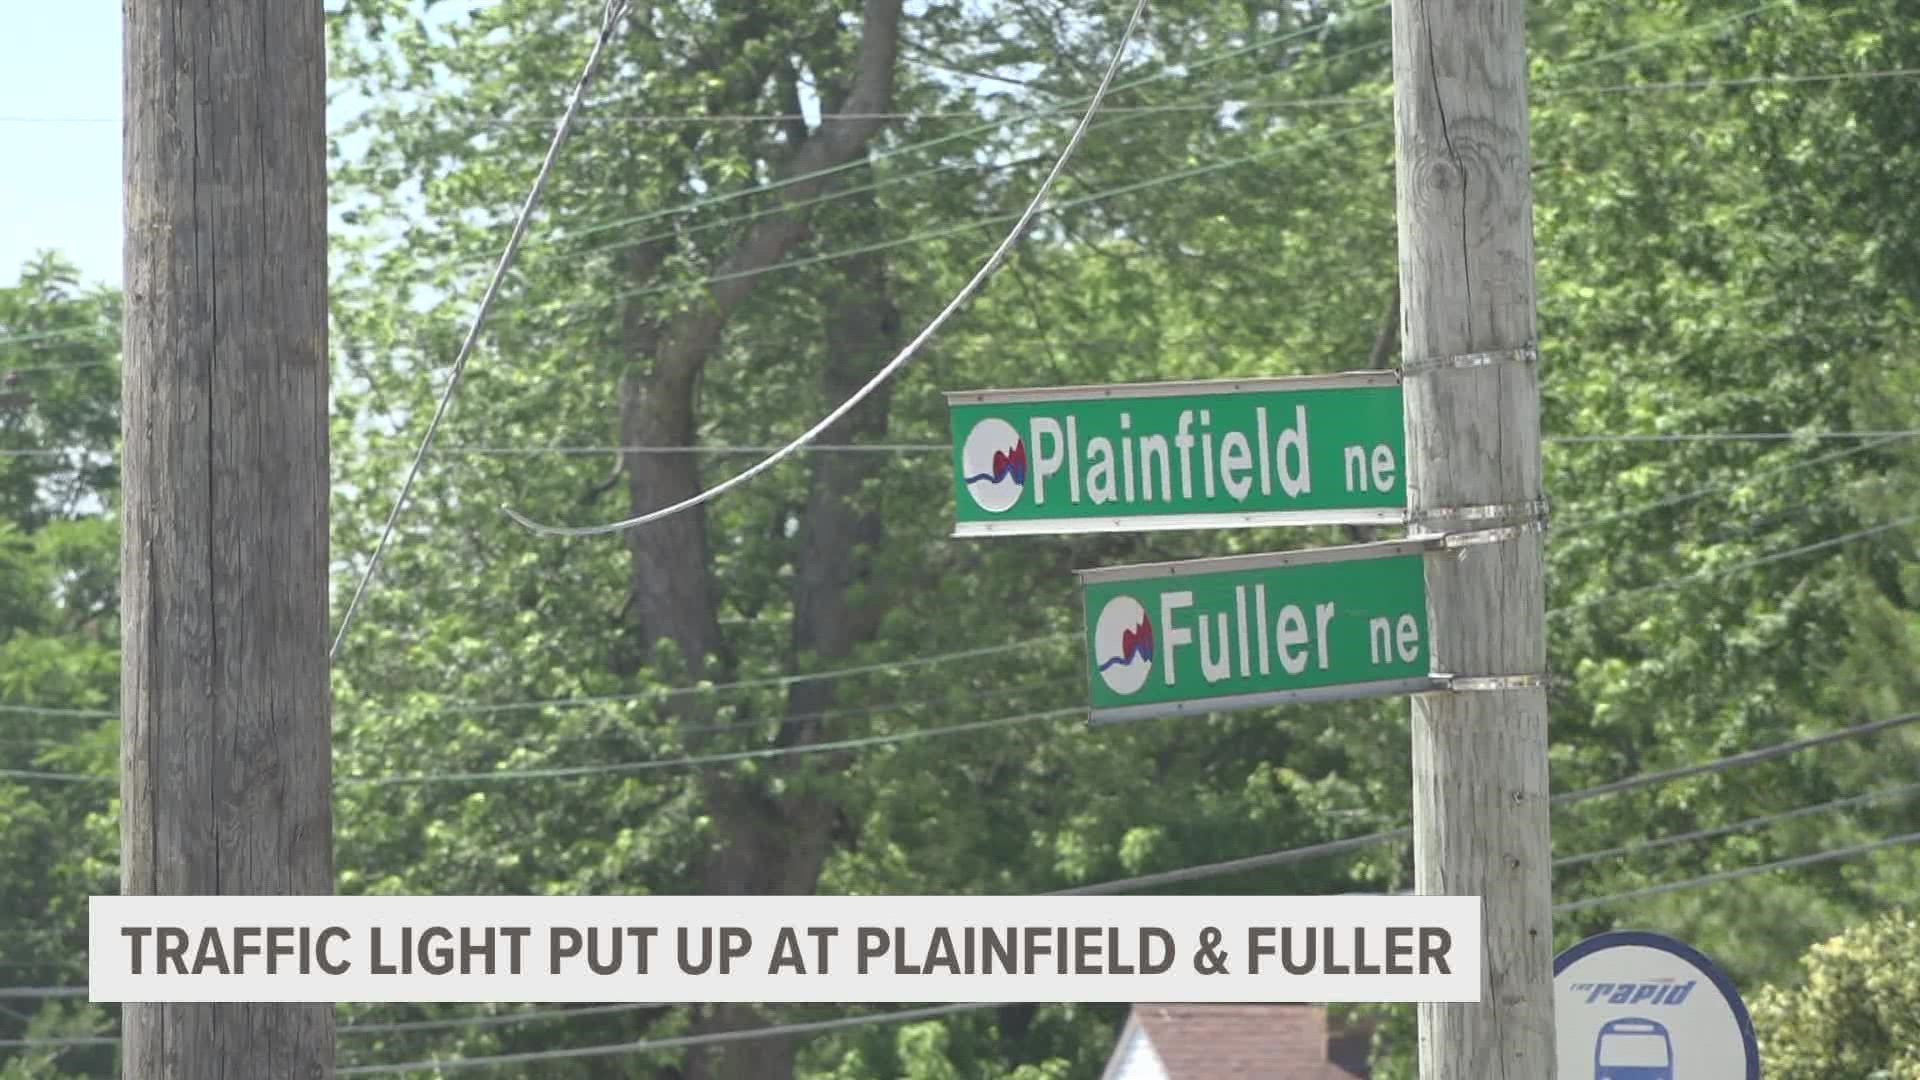 The intersection of Fuller and Plainfield in Grand Rapids is finally getting some safety precautions, two years after a fatal crash involving an 18-year-old.